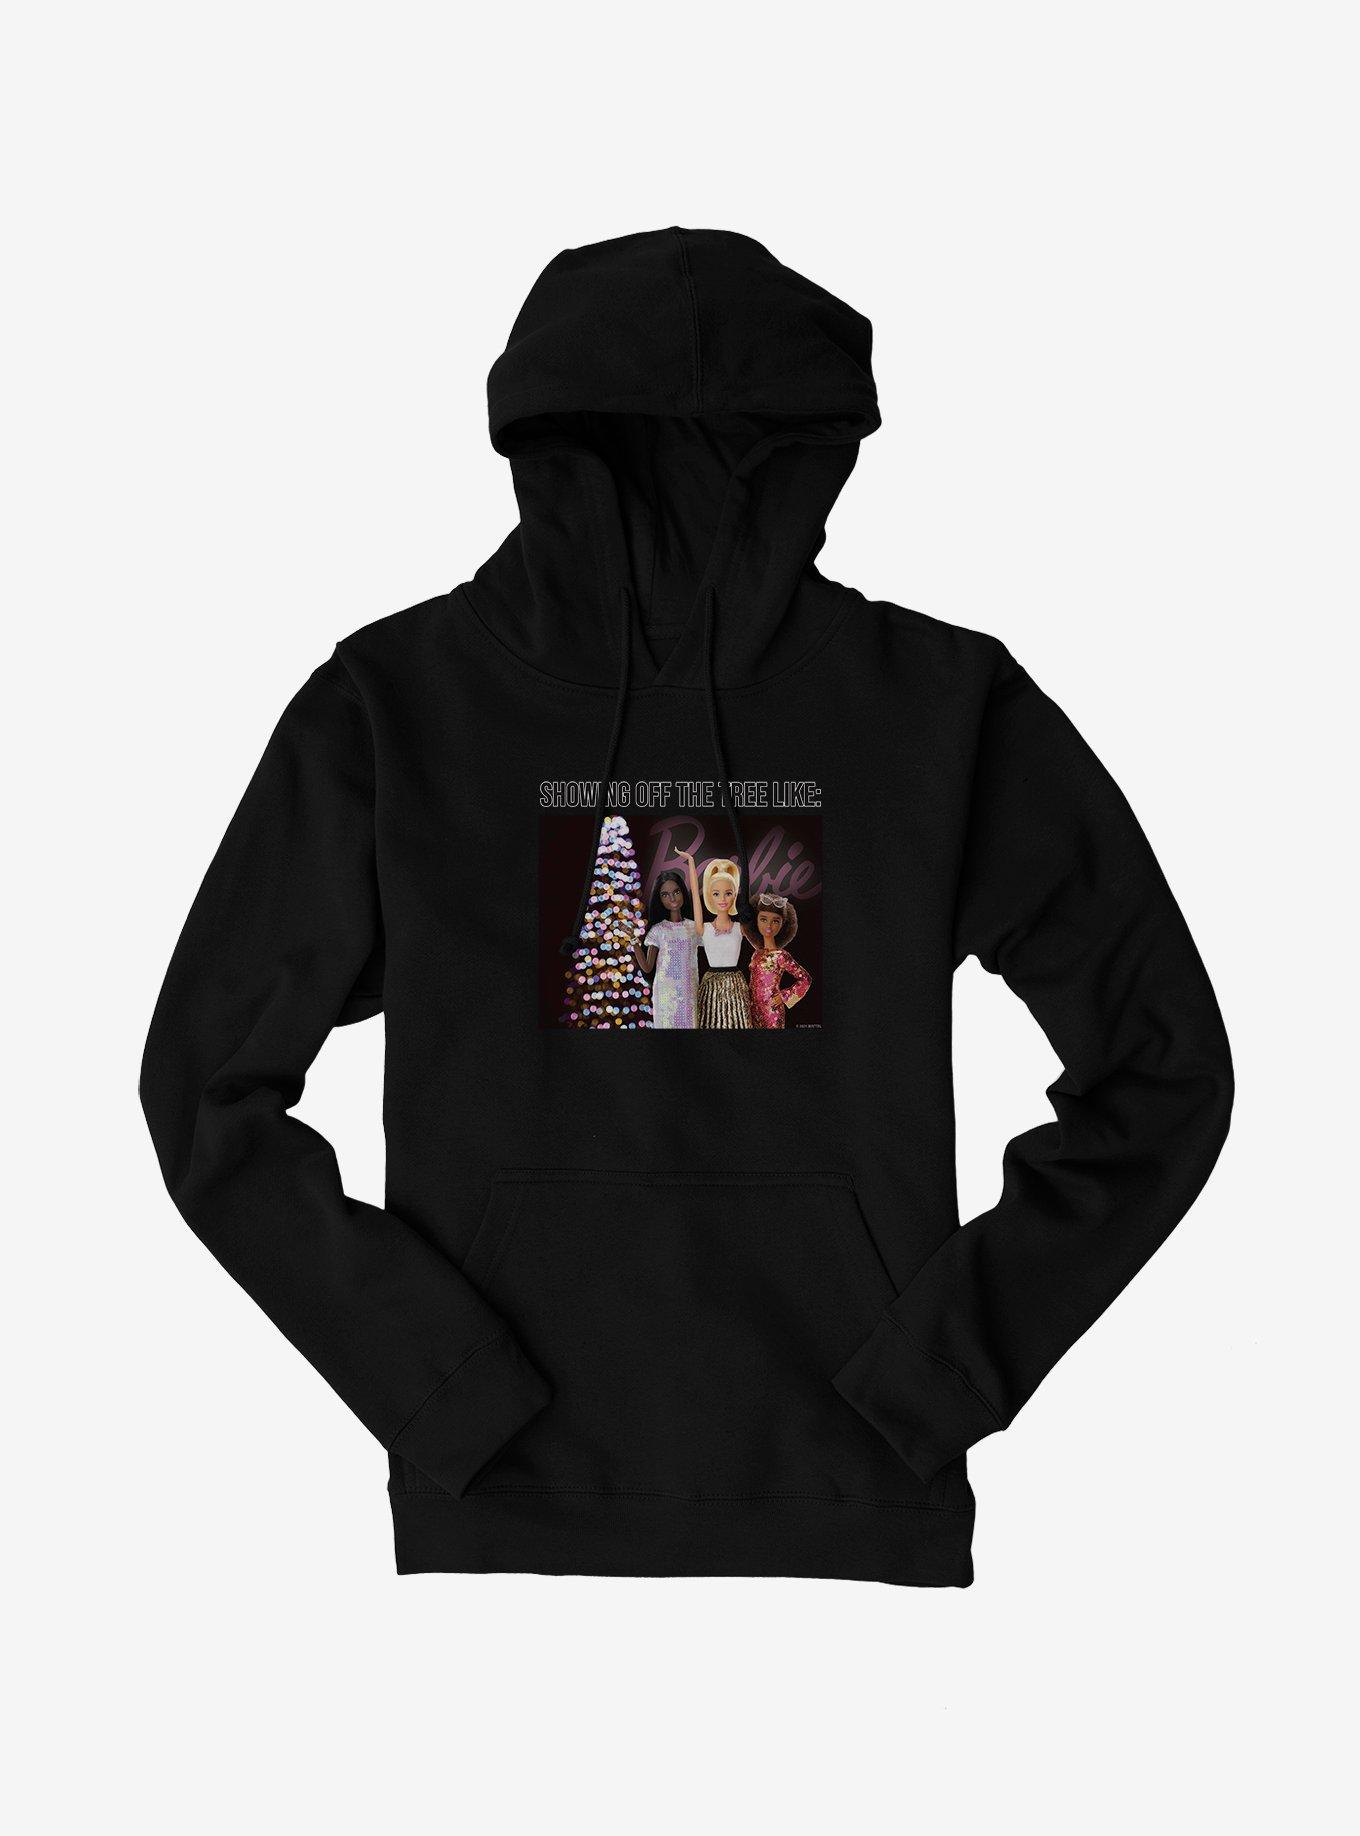 Barbie Holiday Show Off Hoodie